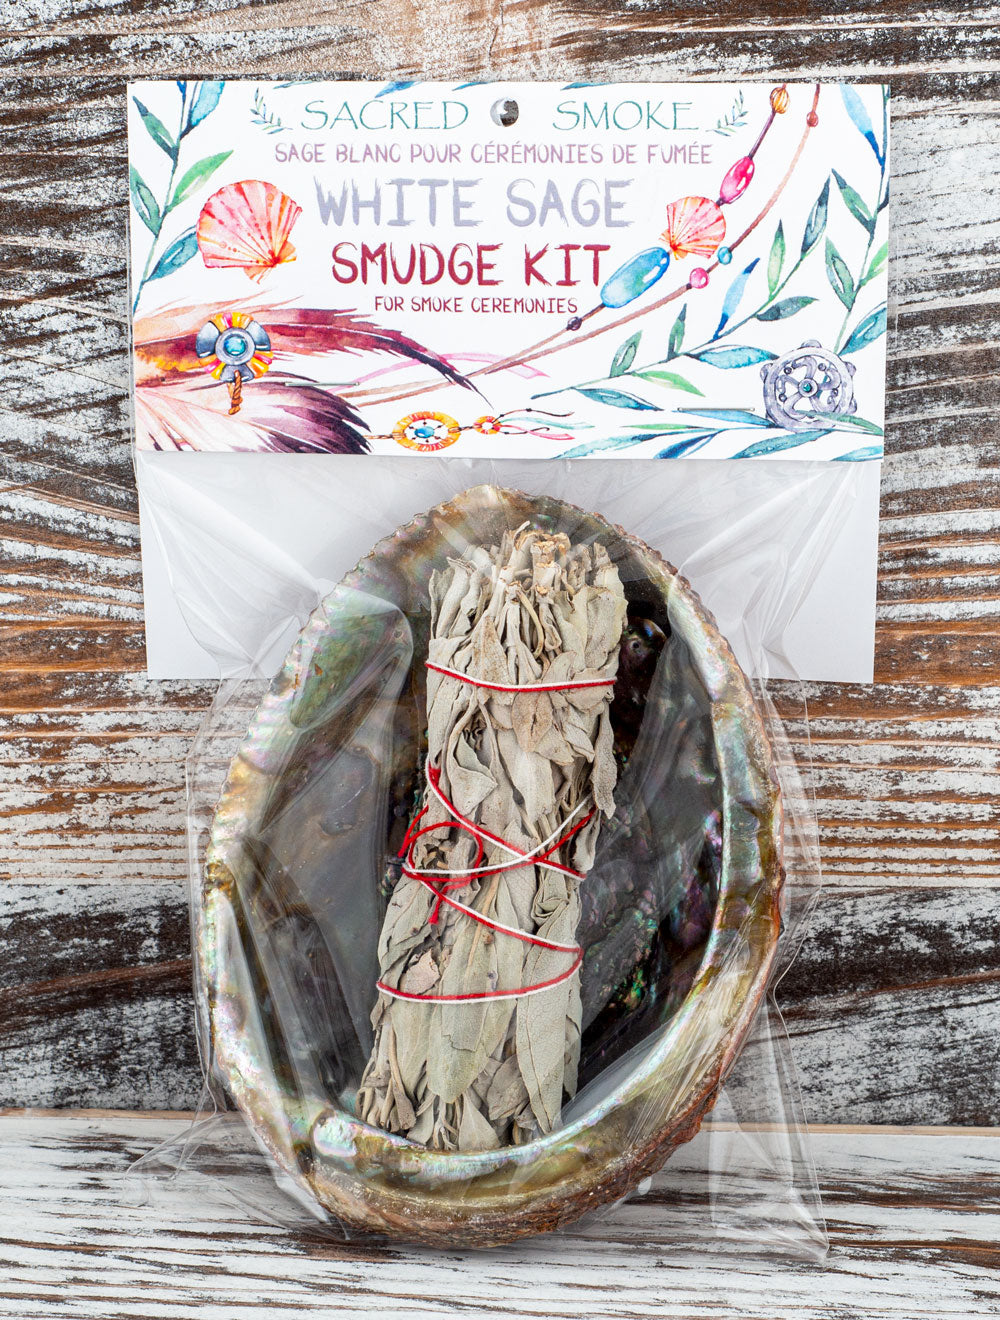 Smudge Kit - 5 Inch Green Abalone Shell With 4 inch White Sage Stick Bundle